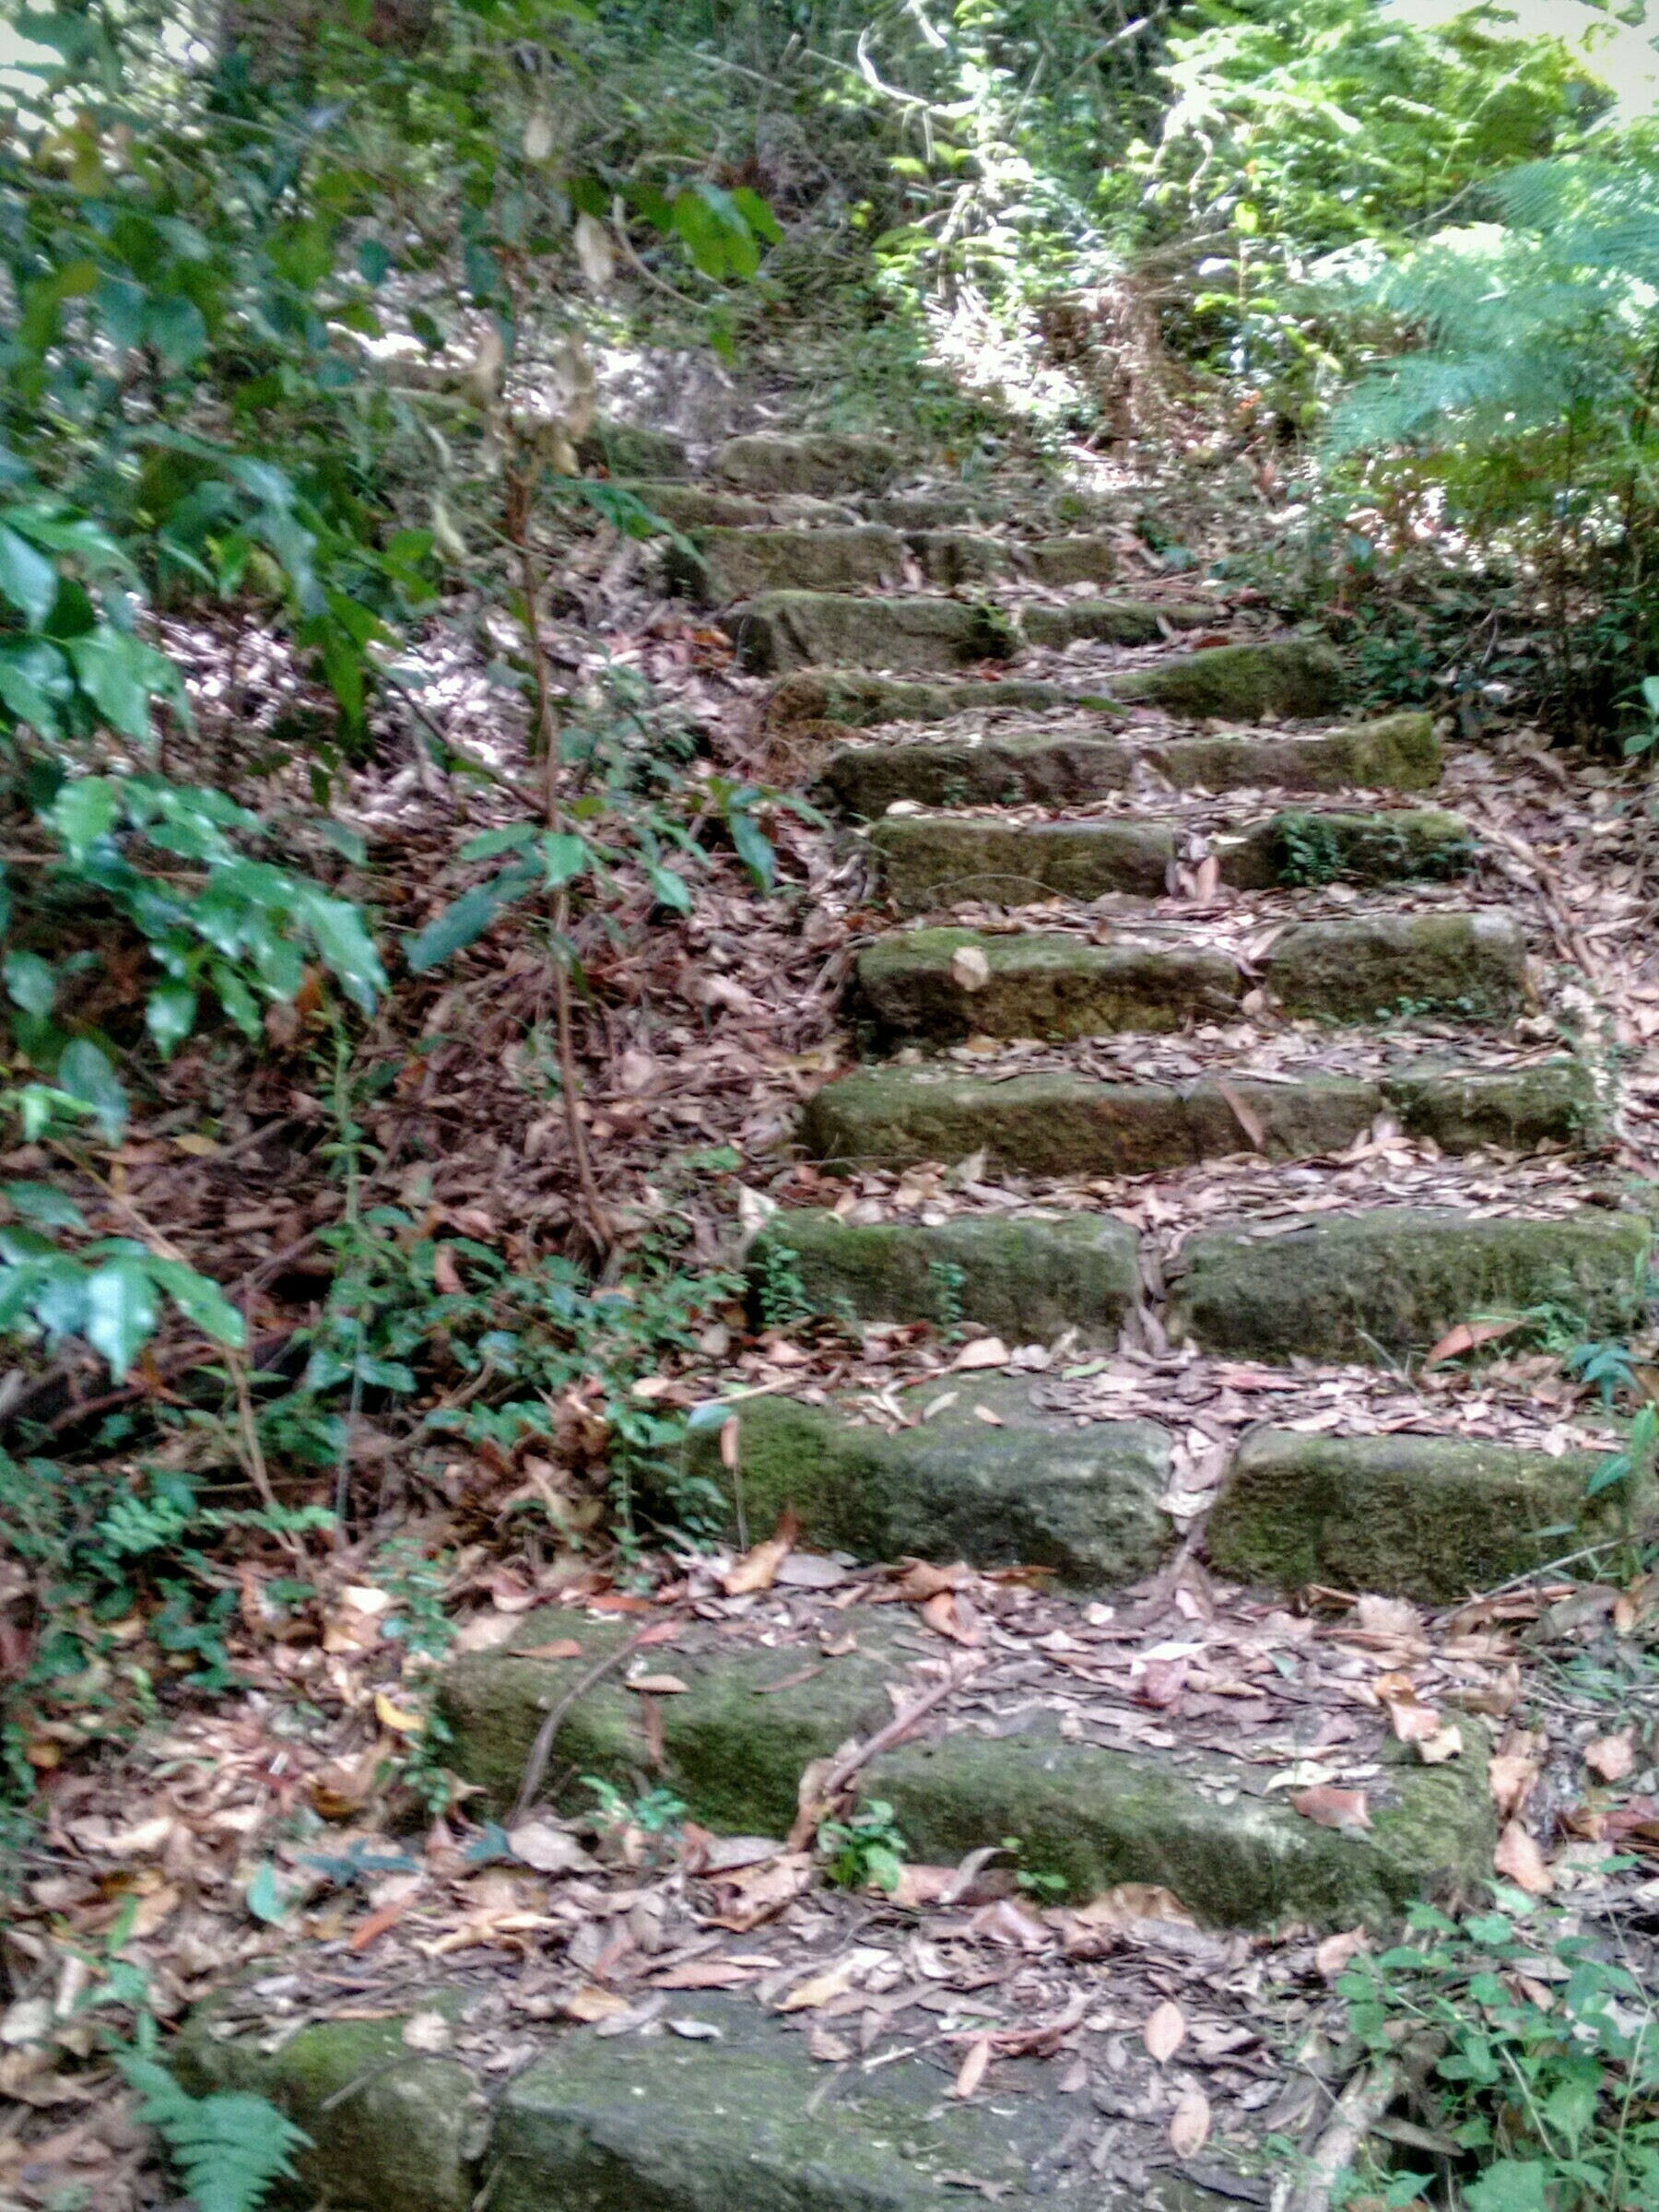 photograph of a stone staircase on a forest trail. The steps curve away upwards and are strewn with fallen leaves